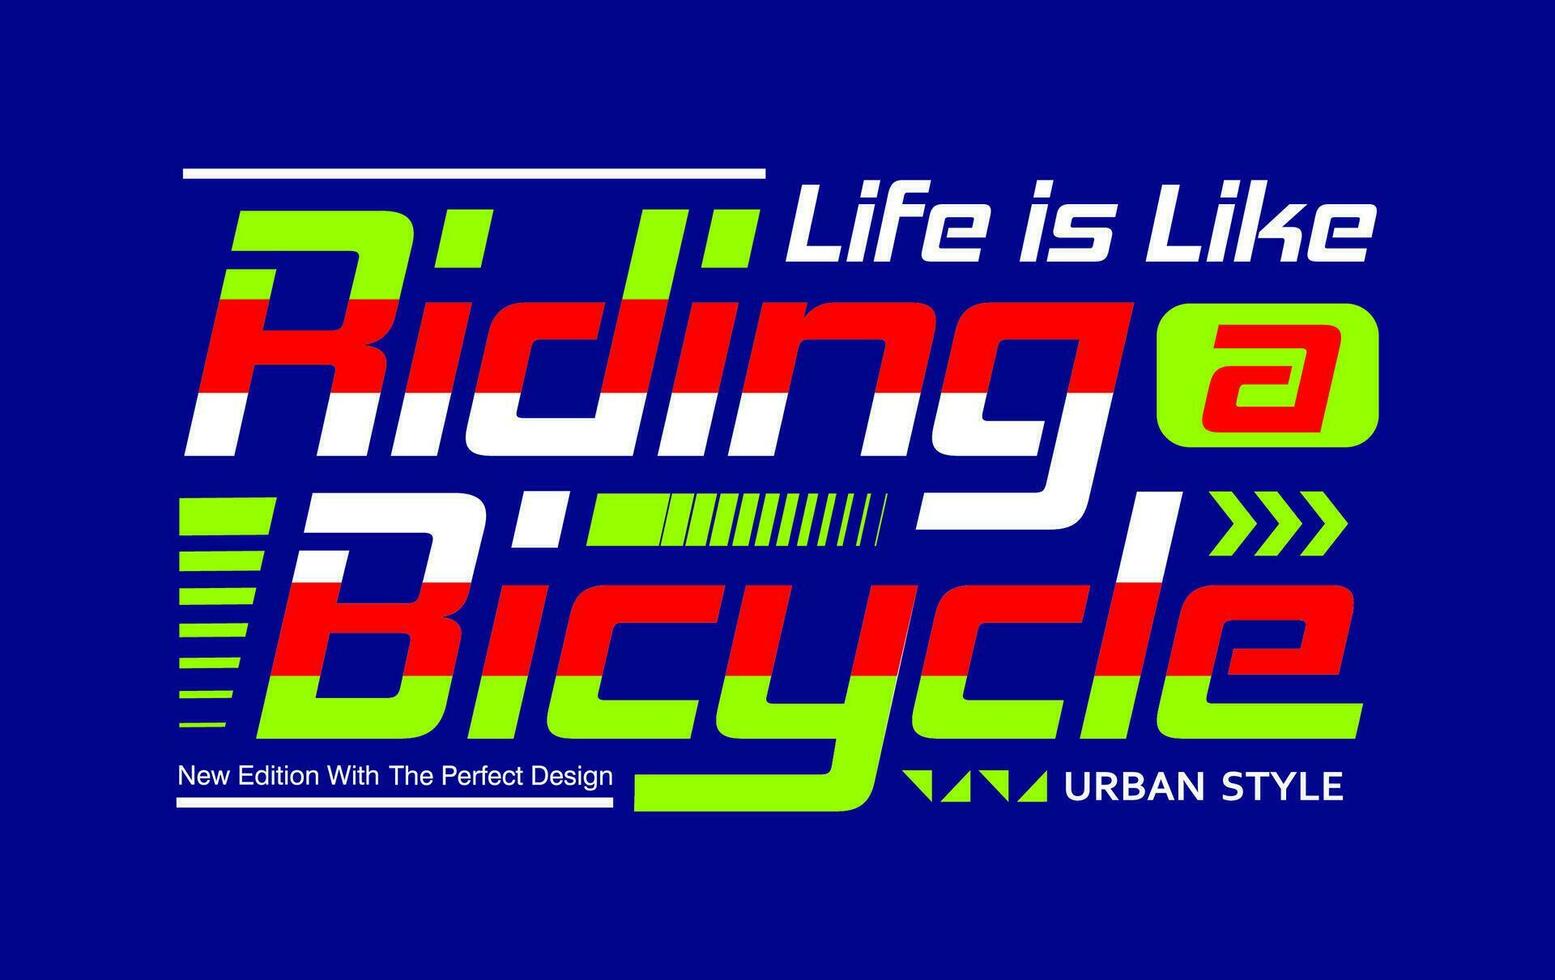 Life is like riding a bicyle motivation, for t-shirt, posters, labels, etc. vector